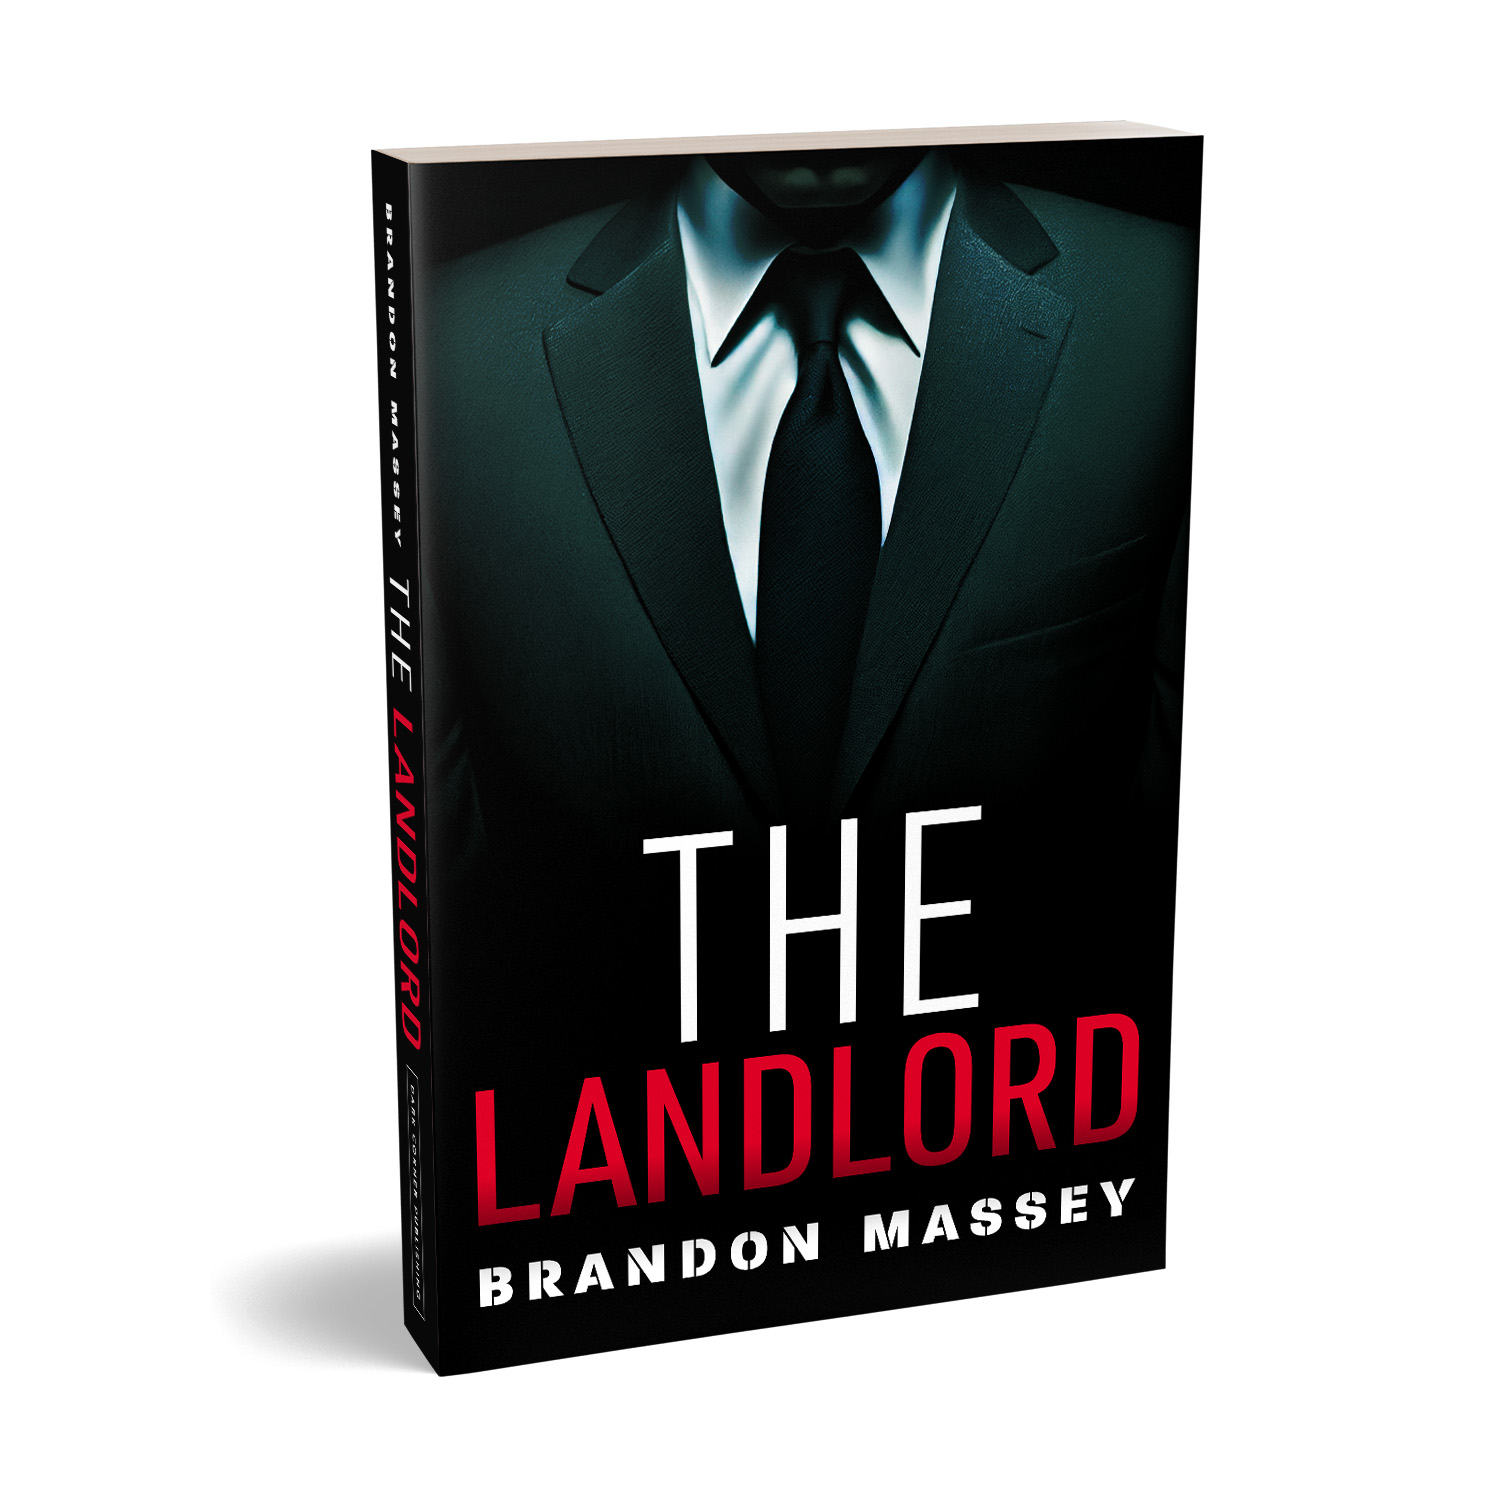 'The Landlord' is a chilling modern domestic thriller. The author is Brandon Massey. The book cover design is by Mark Thomas. To learn more about what Mark could do for your book, please visit coverness.com.